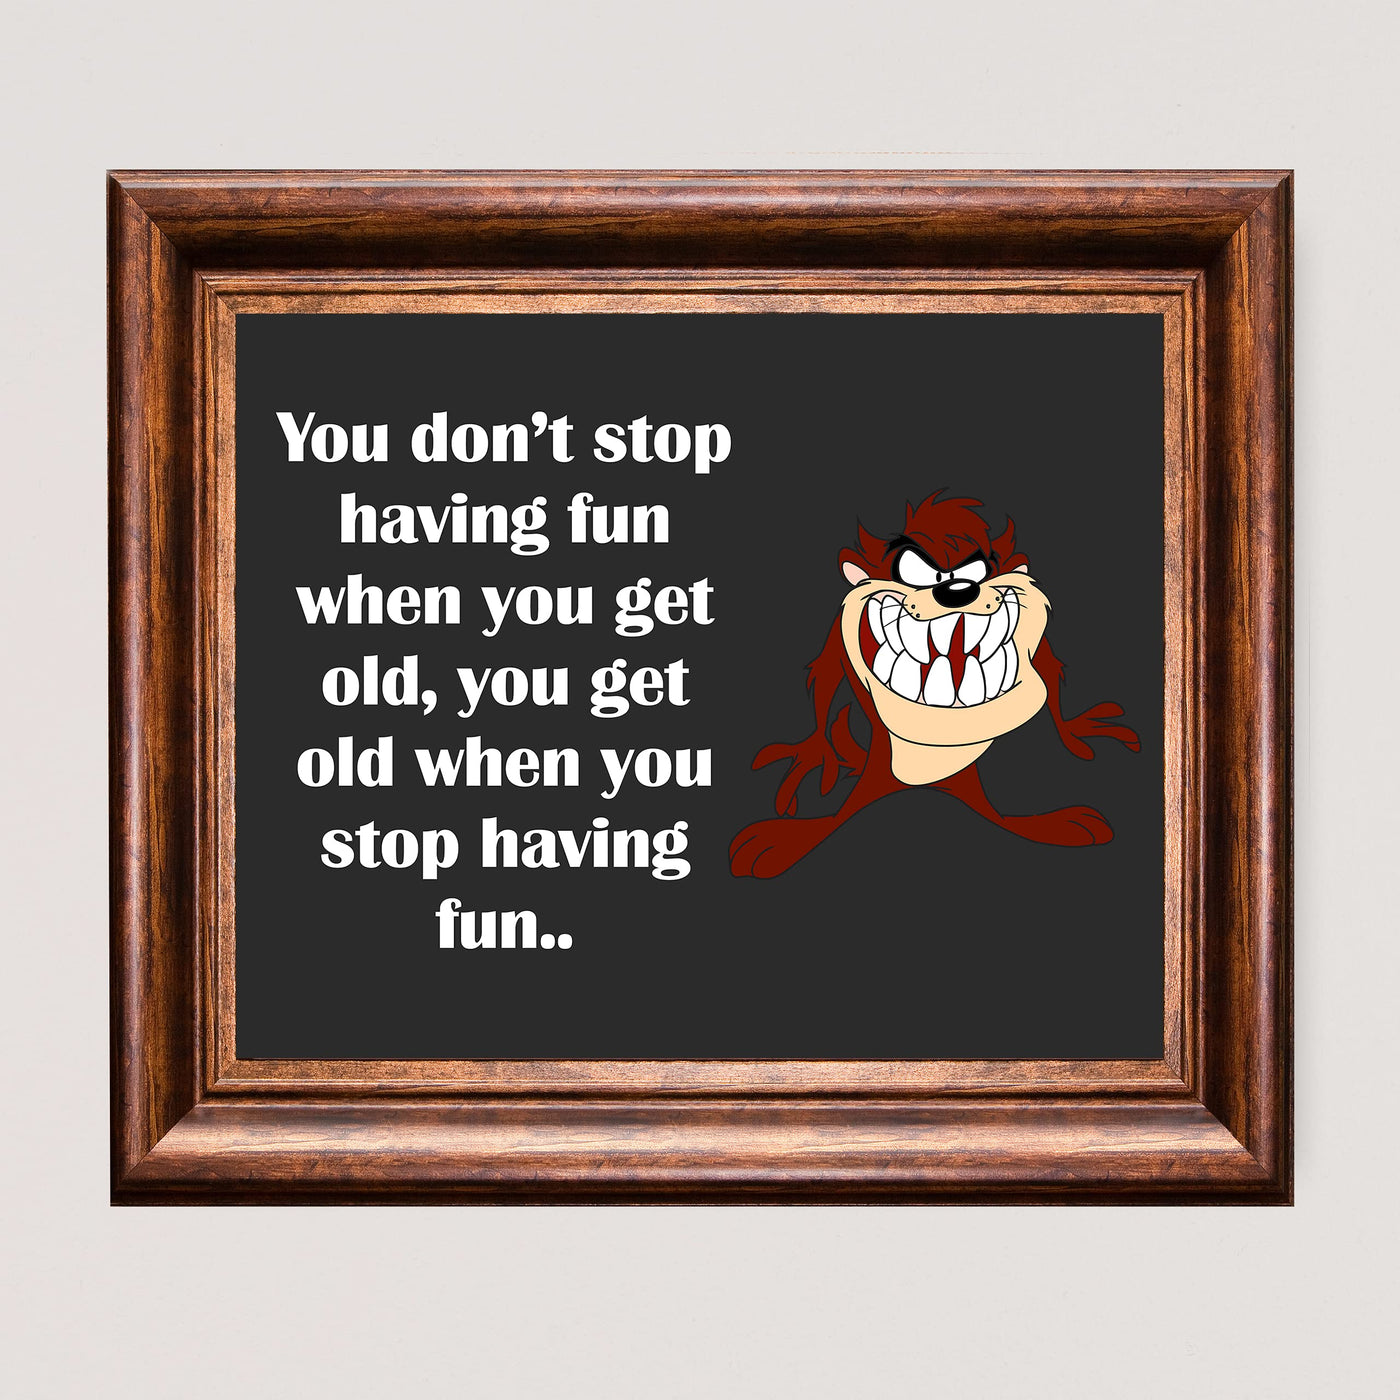 You Get Old When You Stop Having Fun Funny Monster Wall Sign -10 x 8" Typographic Art Print-Ready to Frame. Humorous Home-Bar-Shop-Cave-Novelty Decor. Perfect Sarcastic Gift for Friends & Family!